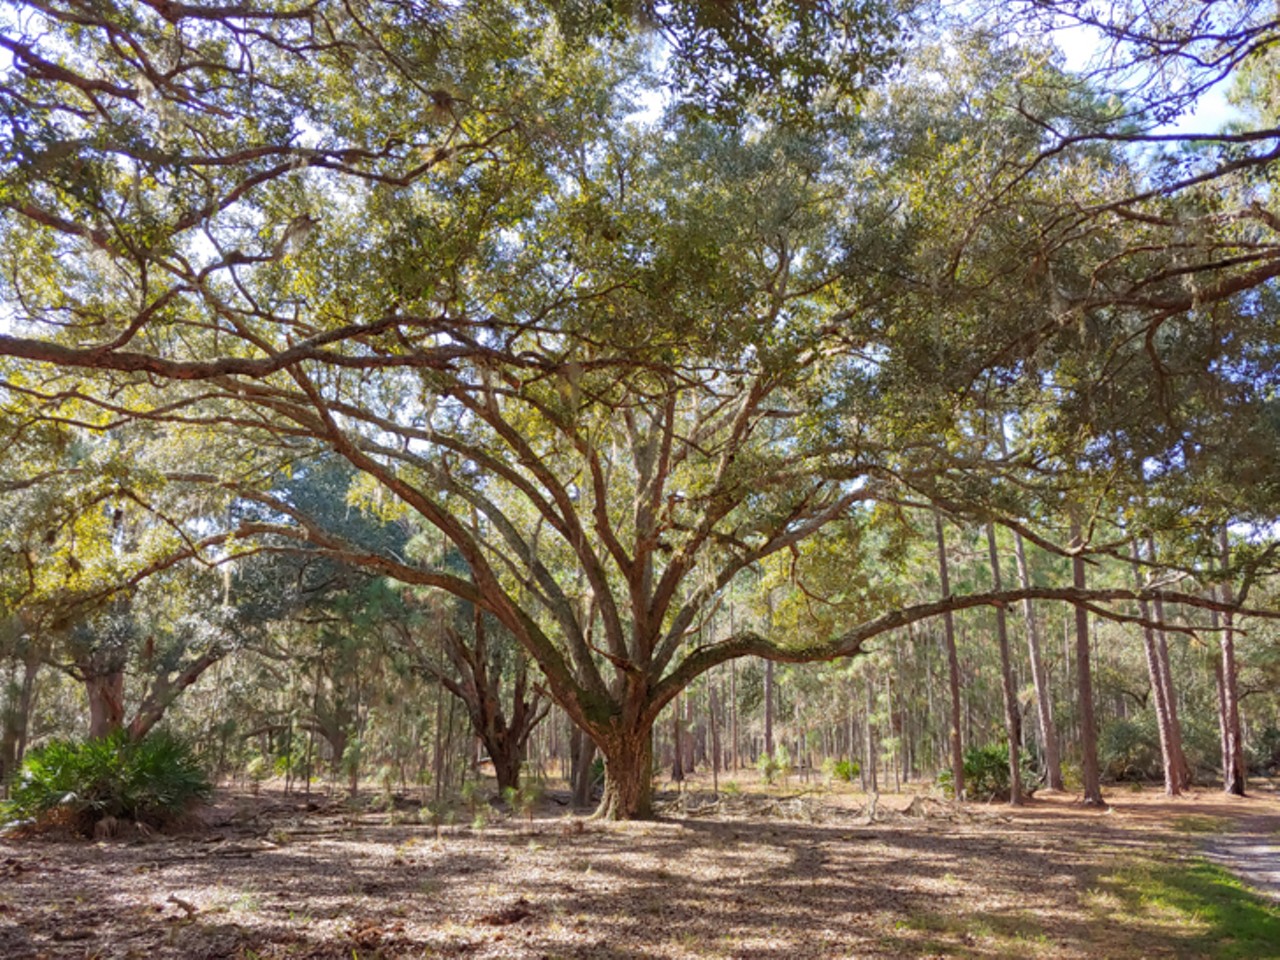 Take a look at Orange County's Split Oak Forest before it's destroyed by a new highway